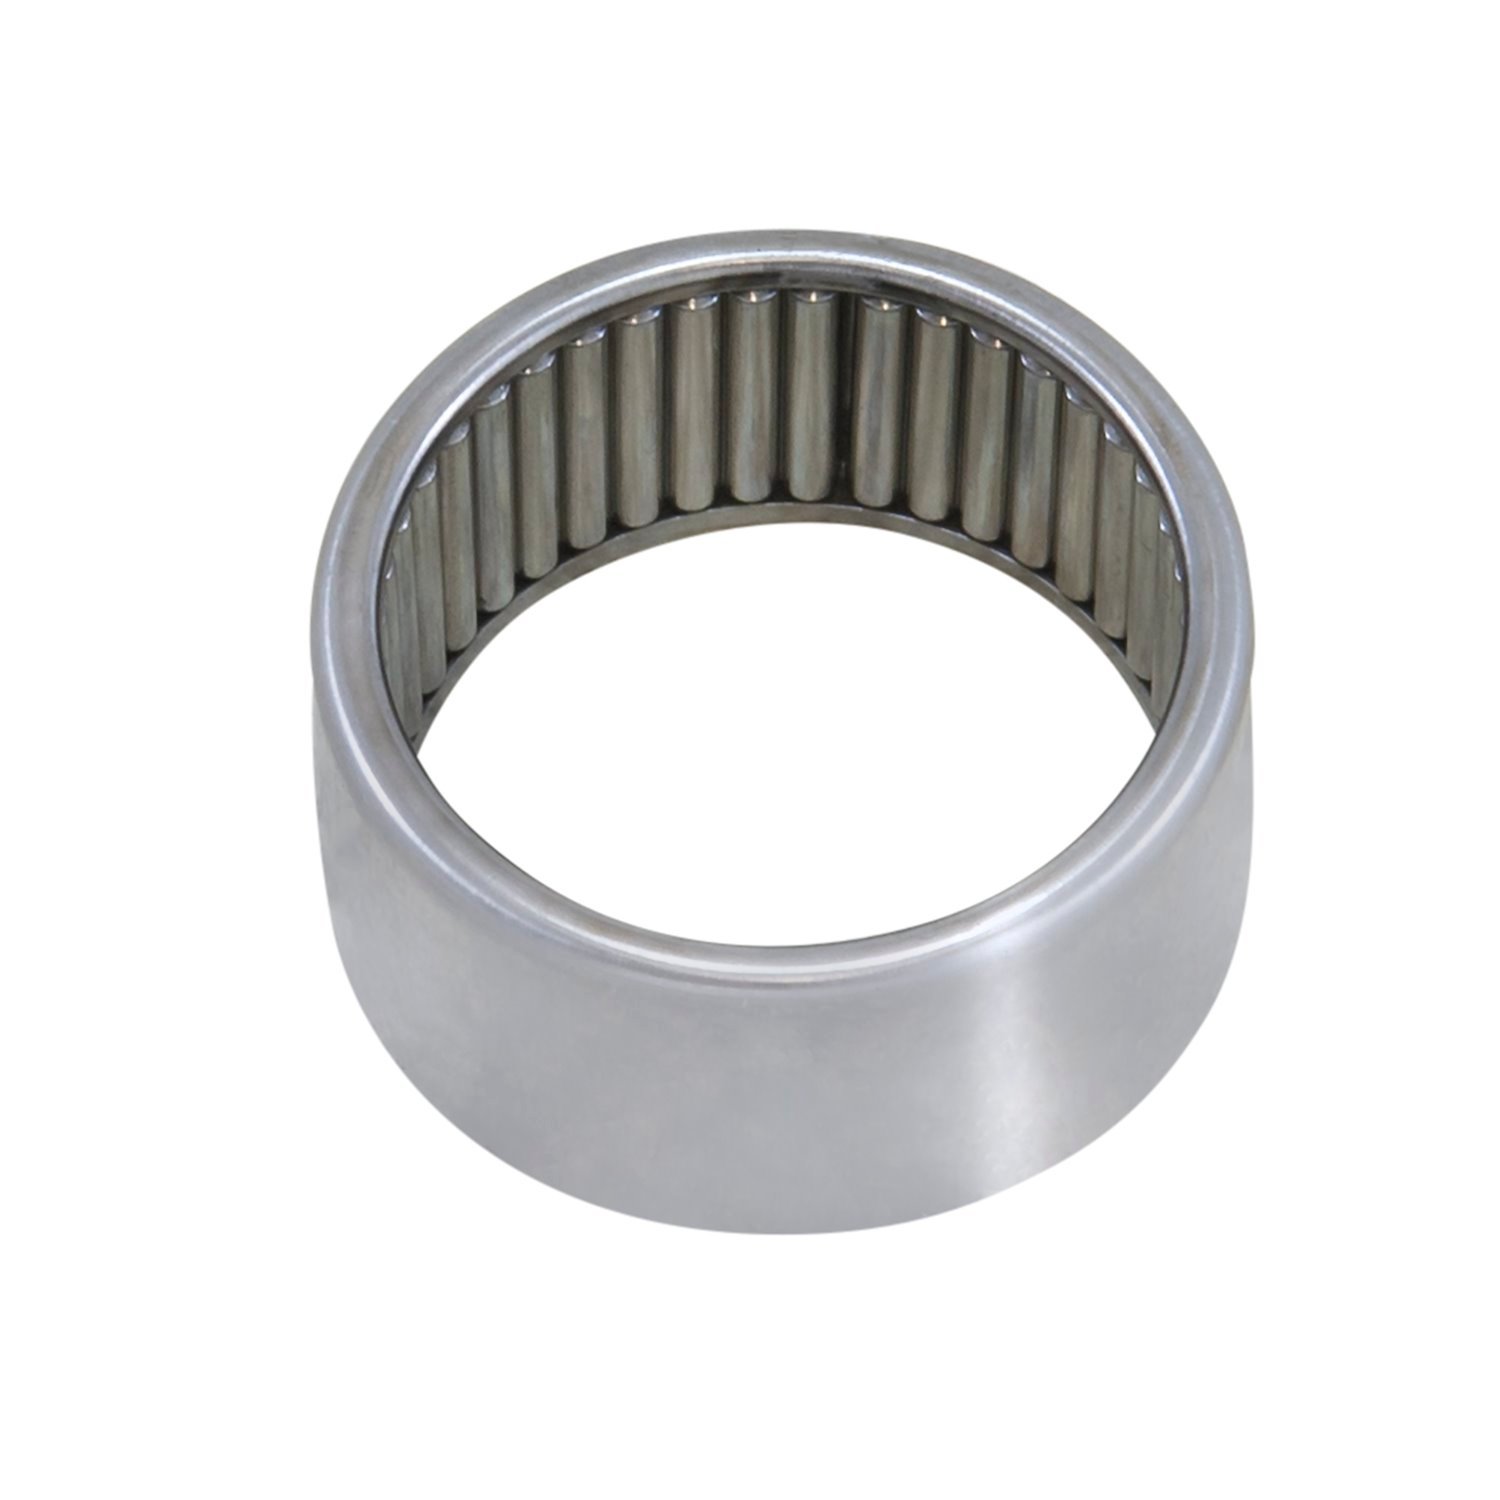 8.25 in. Ifs GM Axle Bearing, With 1.250